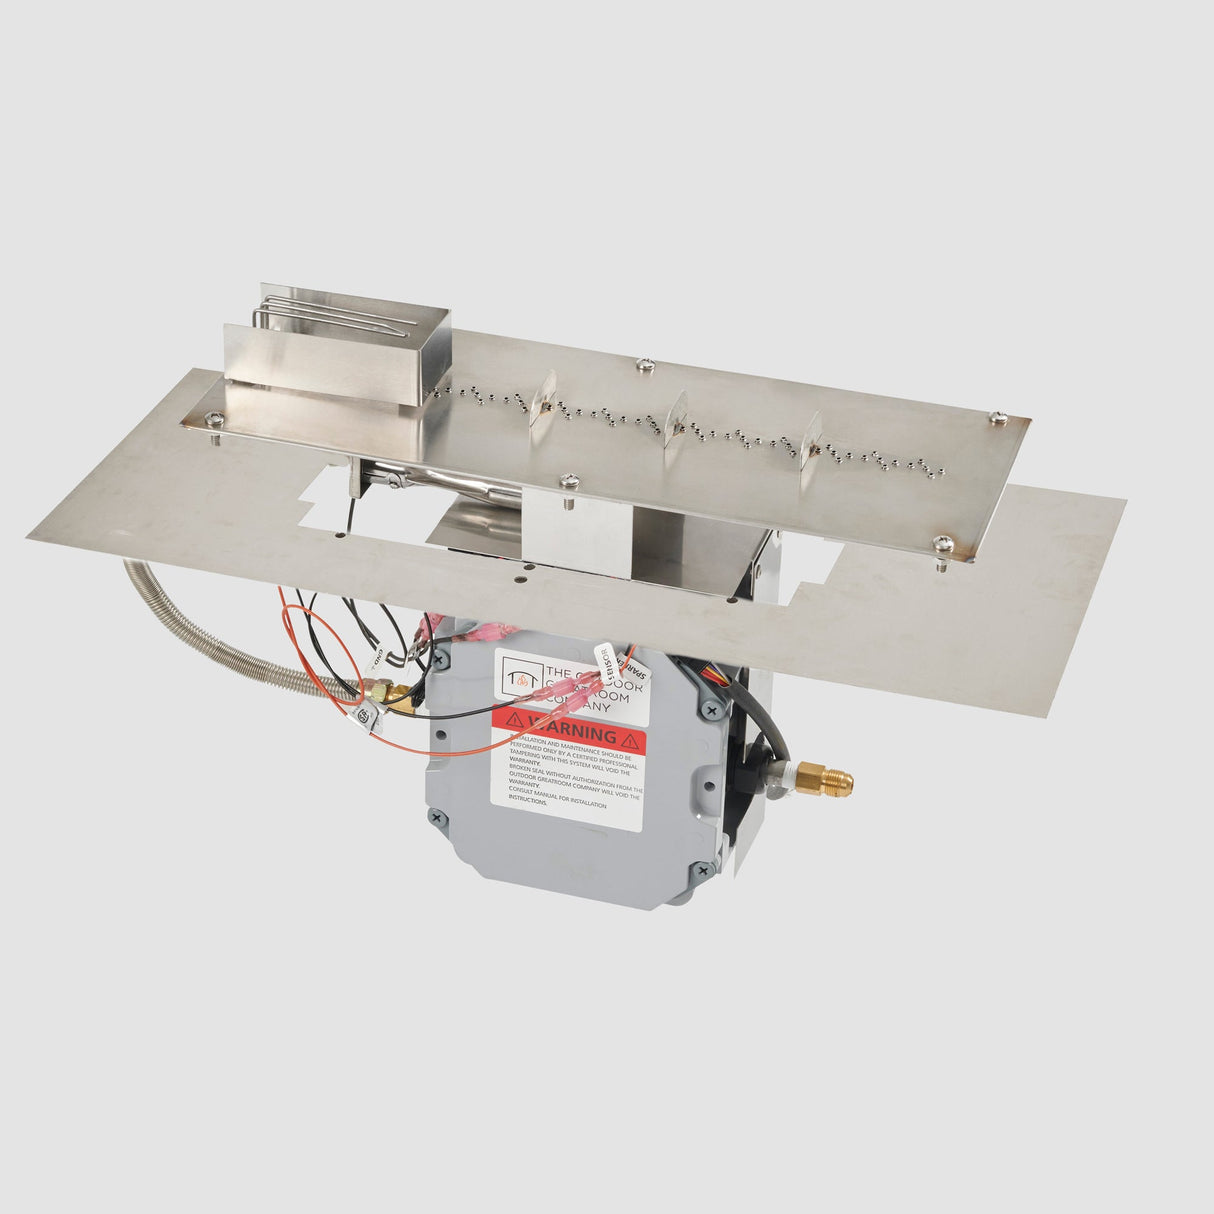 The 24" Crystal Fire Plus Linear Gas Burner Insert and Plate Kit with Direct Spark Ignition on a grey background